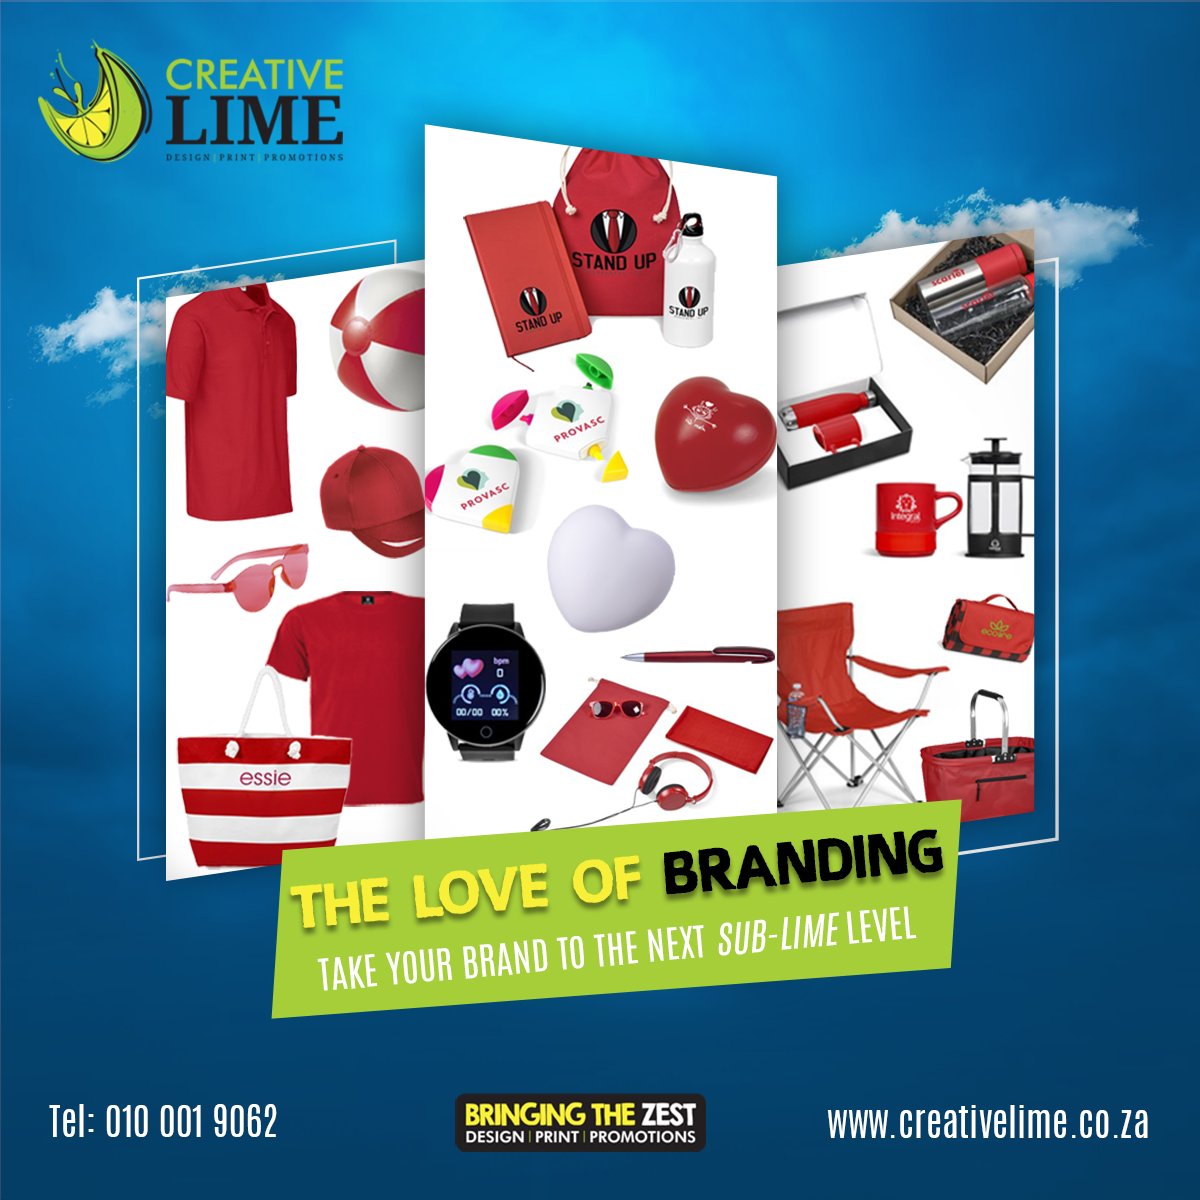 Show some LOVE this Valentine's day! We have a massive range of promotional & corporate gifts and clothing for all your branding needs. Don't forget, we also offer in-house embroidery for all those last minute ideas!
#valentinesgifts #valentinesideas